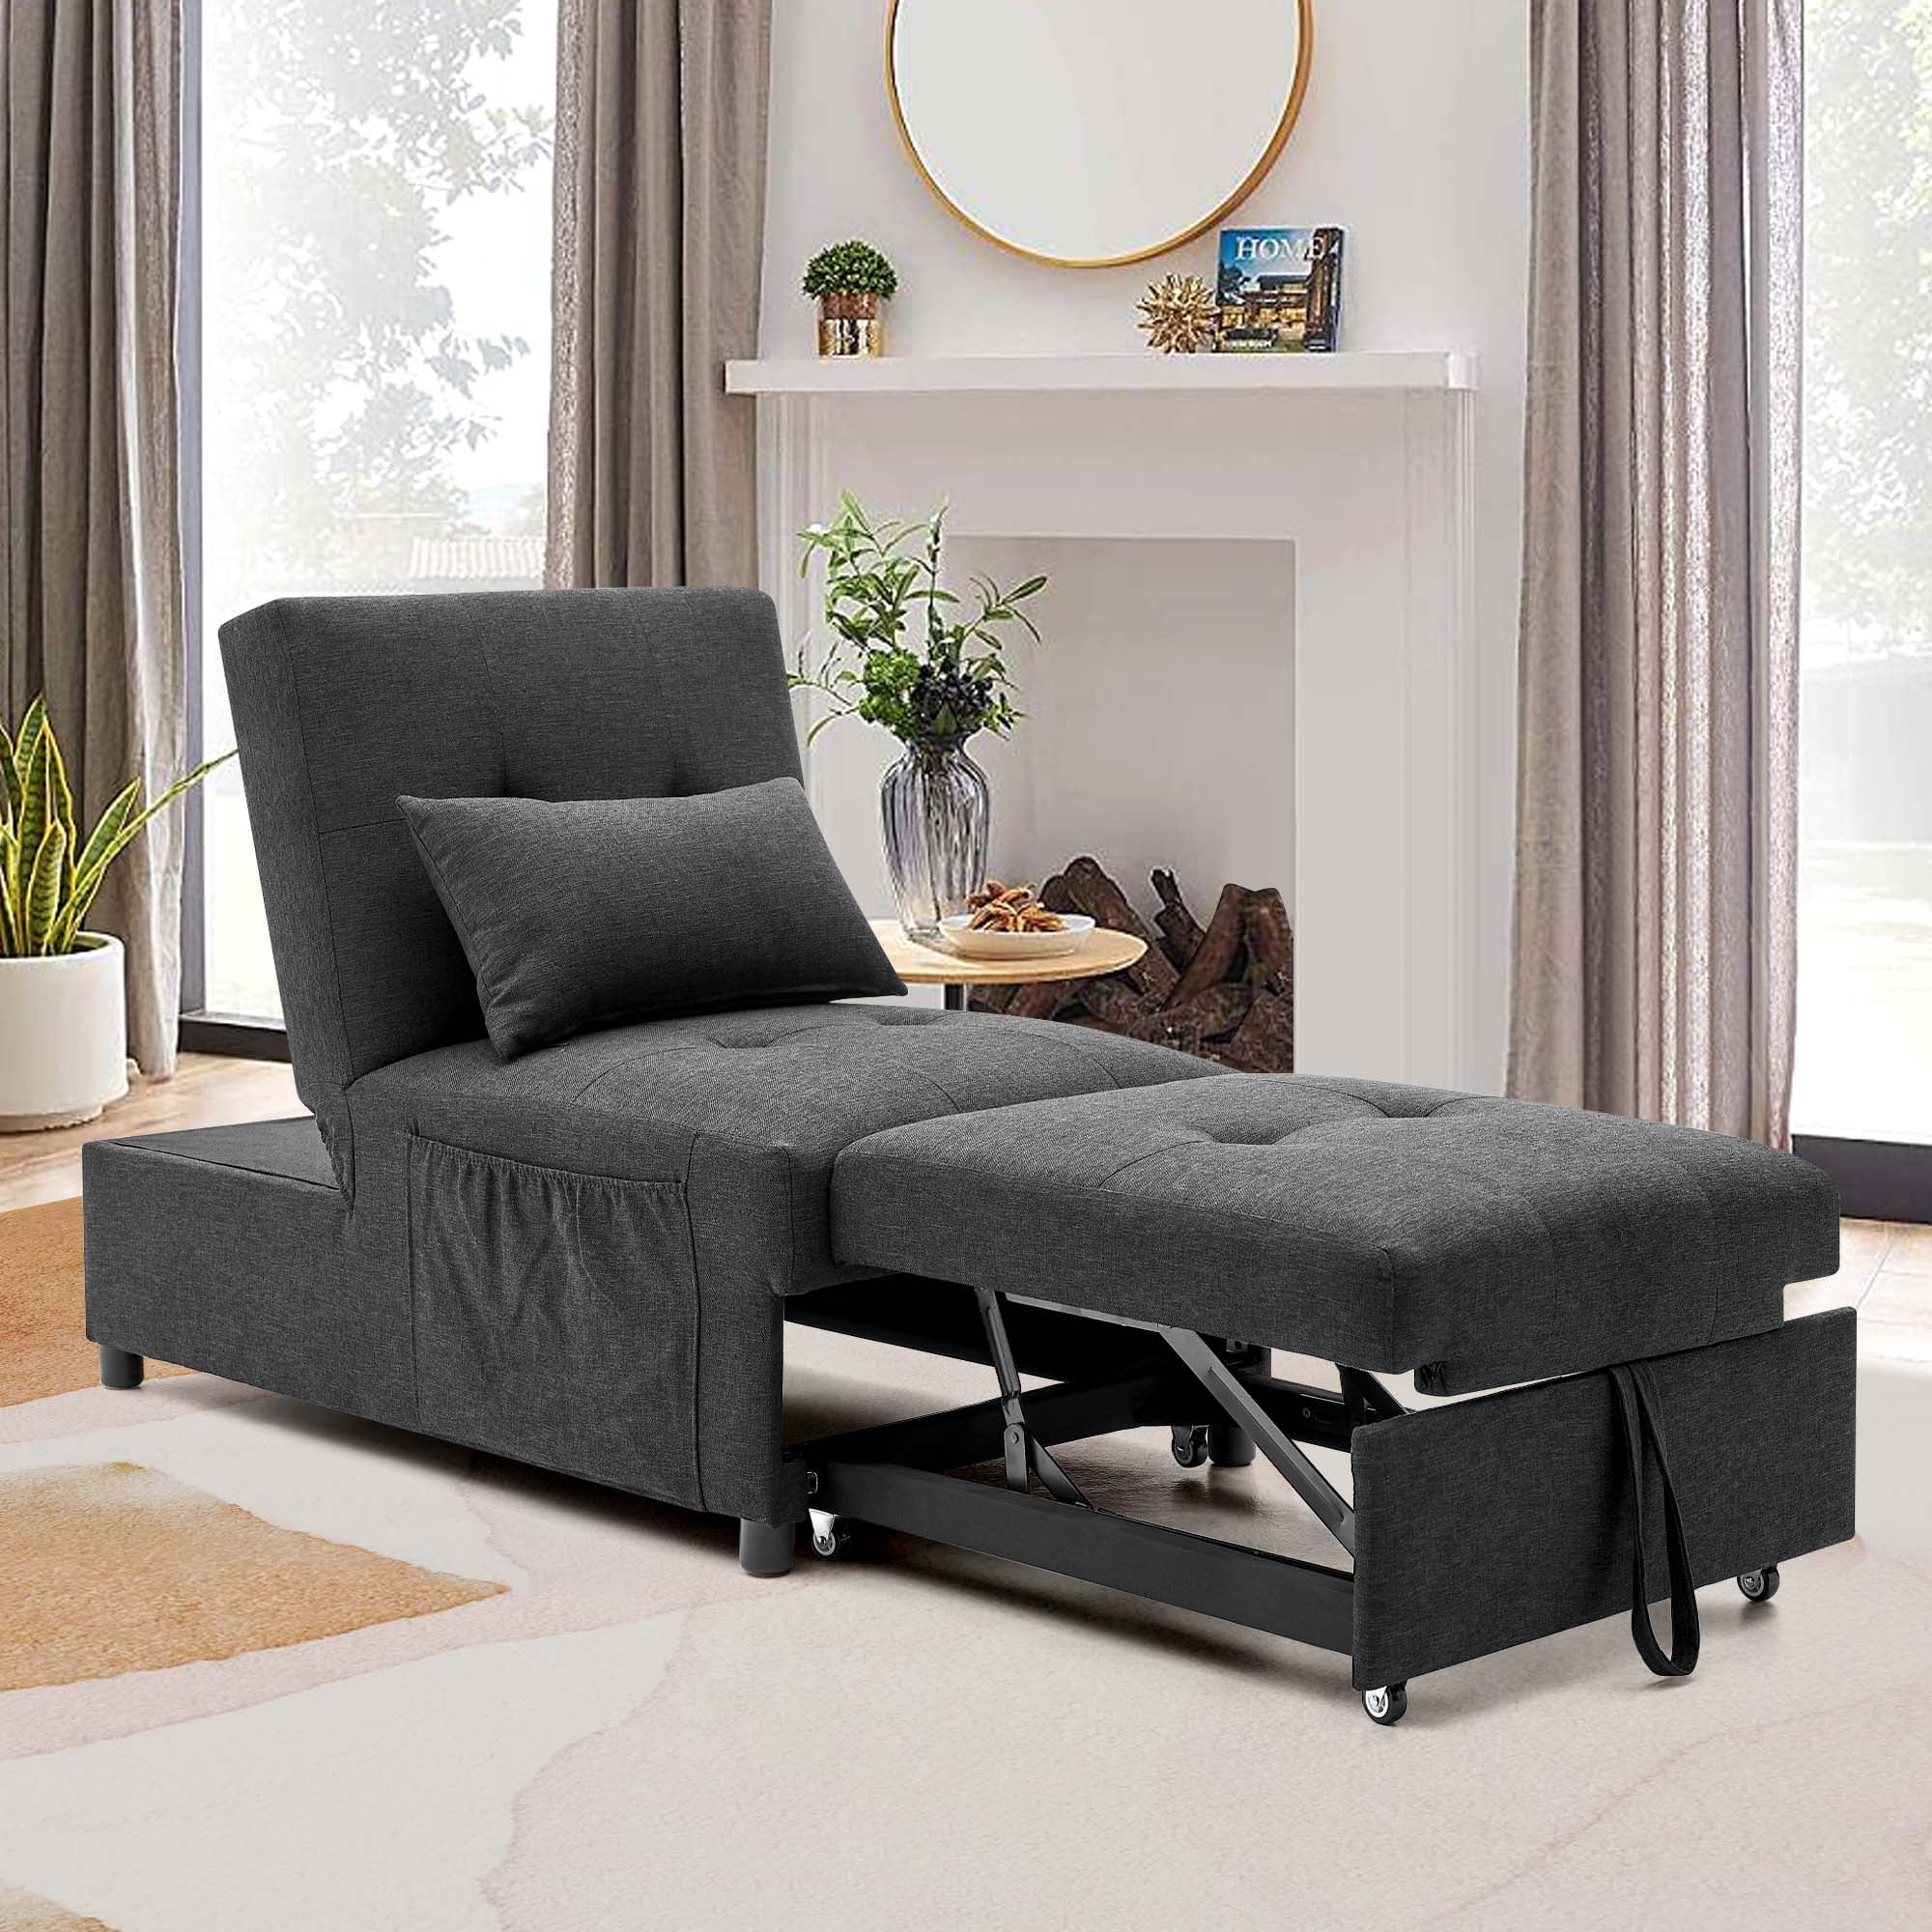 Aukfa Futon Sofa Bed Chair, 4 in 1 Pull Out Convertible Sleeper Chaise ...